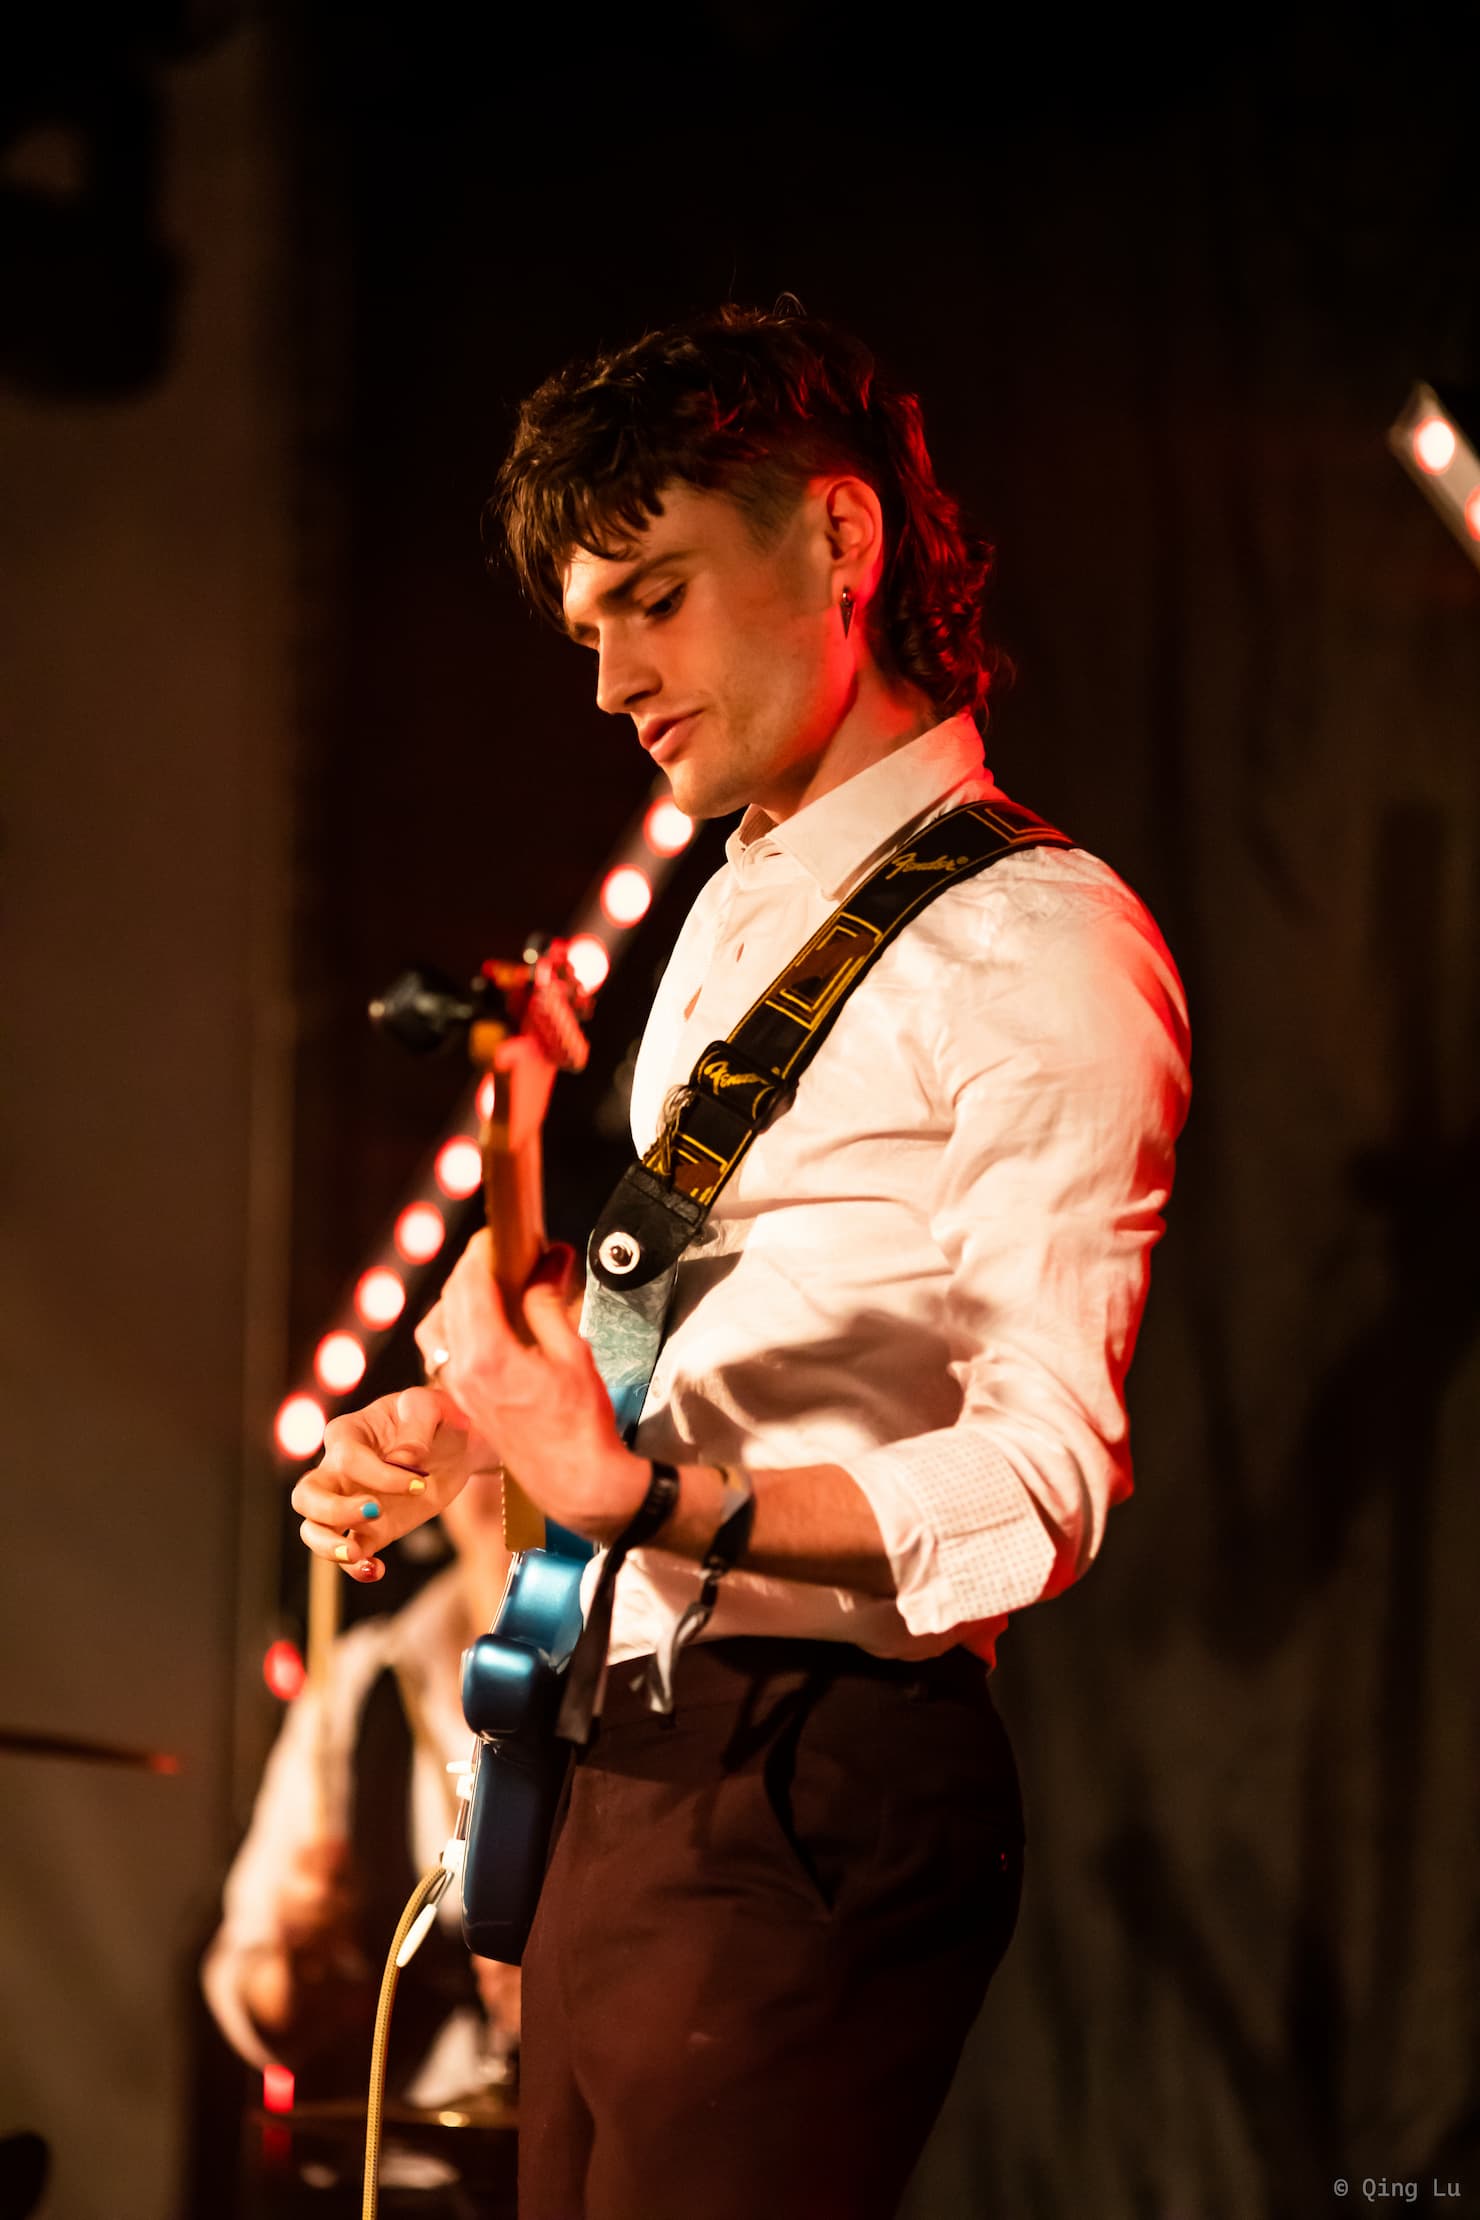 Noah playing guitar on stage